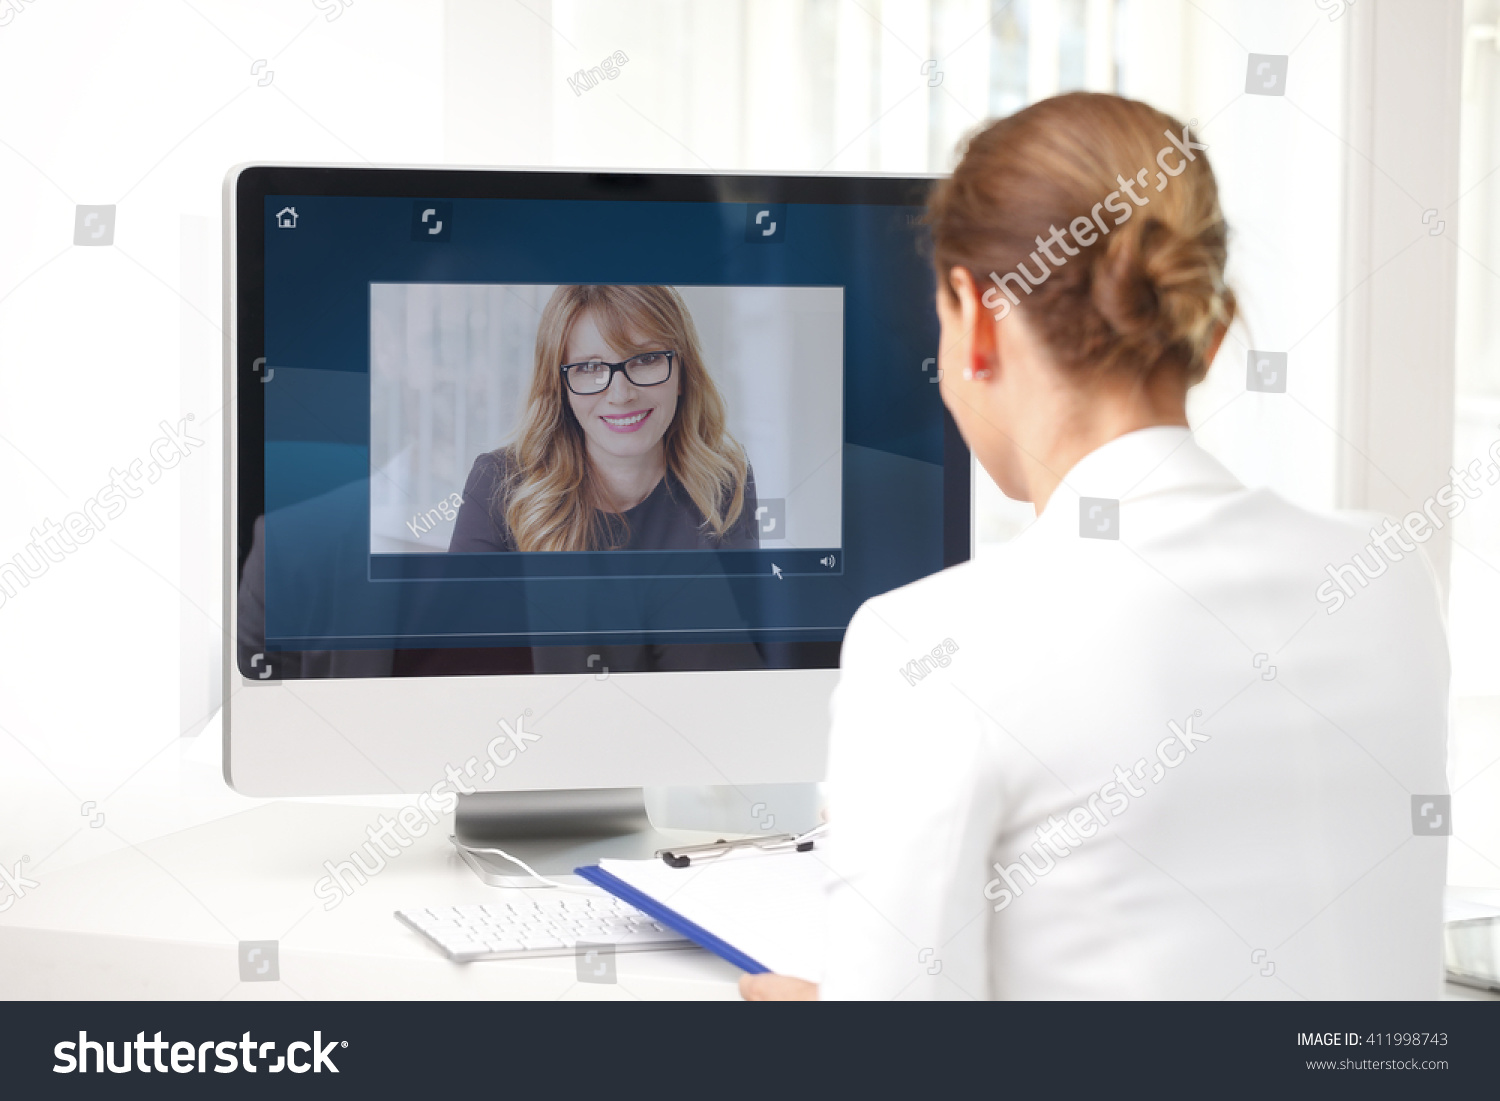 Rear view shot of middle age businesswoman sitting at her workplace and having video chat with executive professional woman.  #411998743